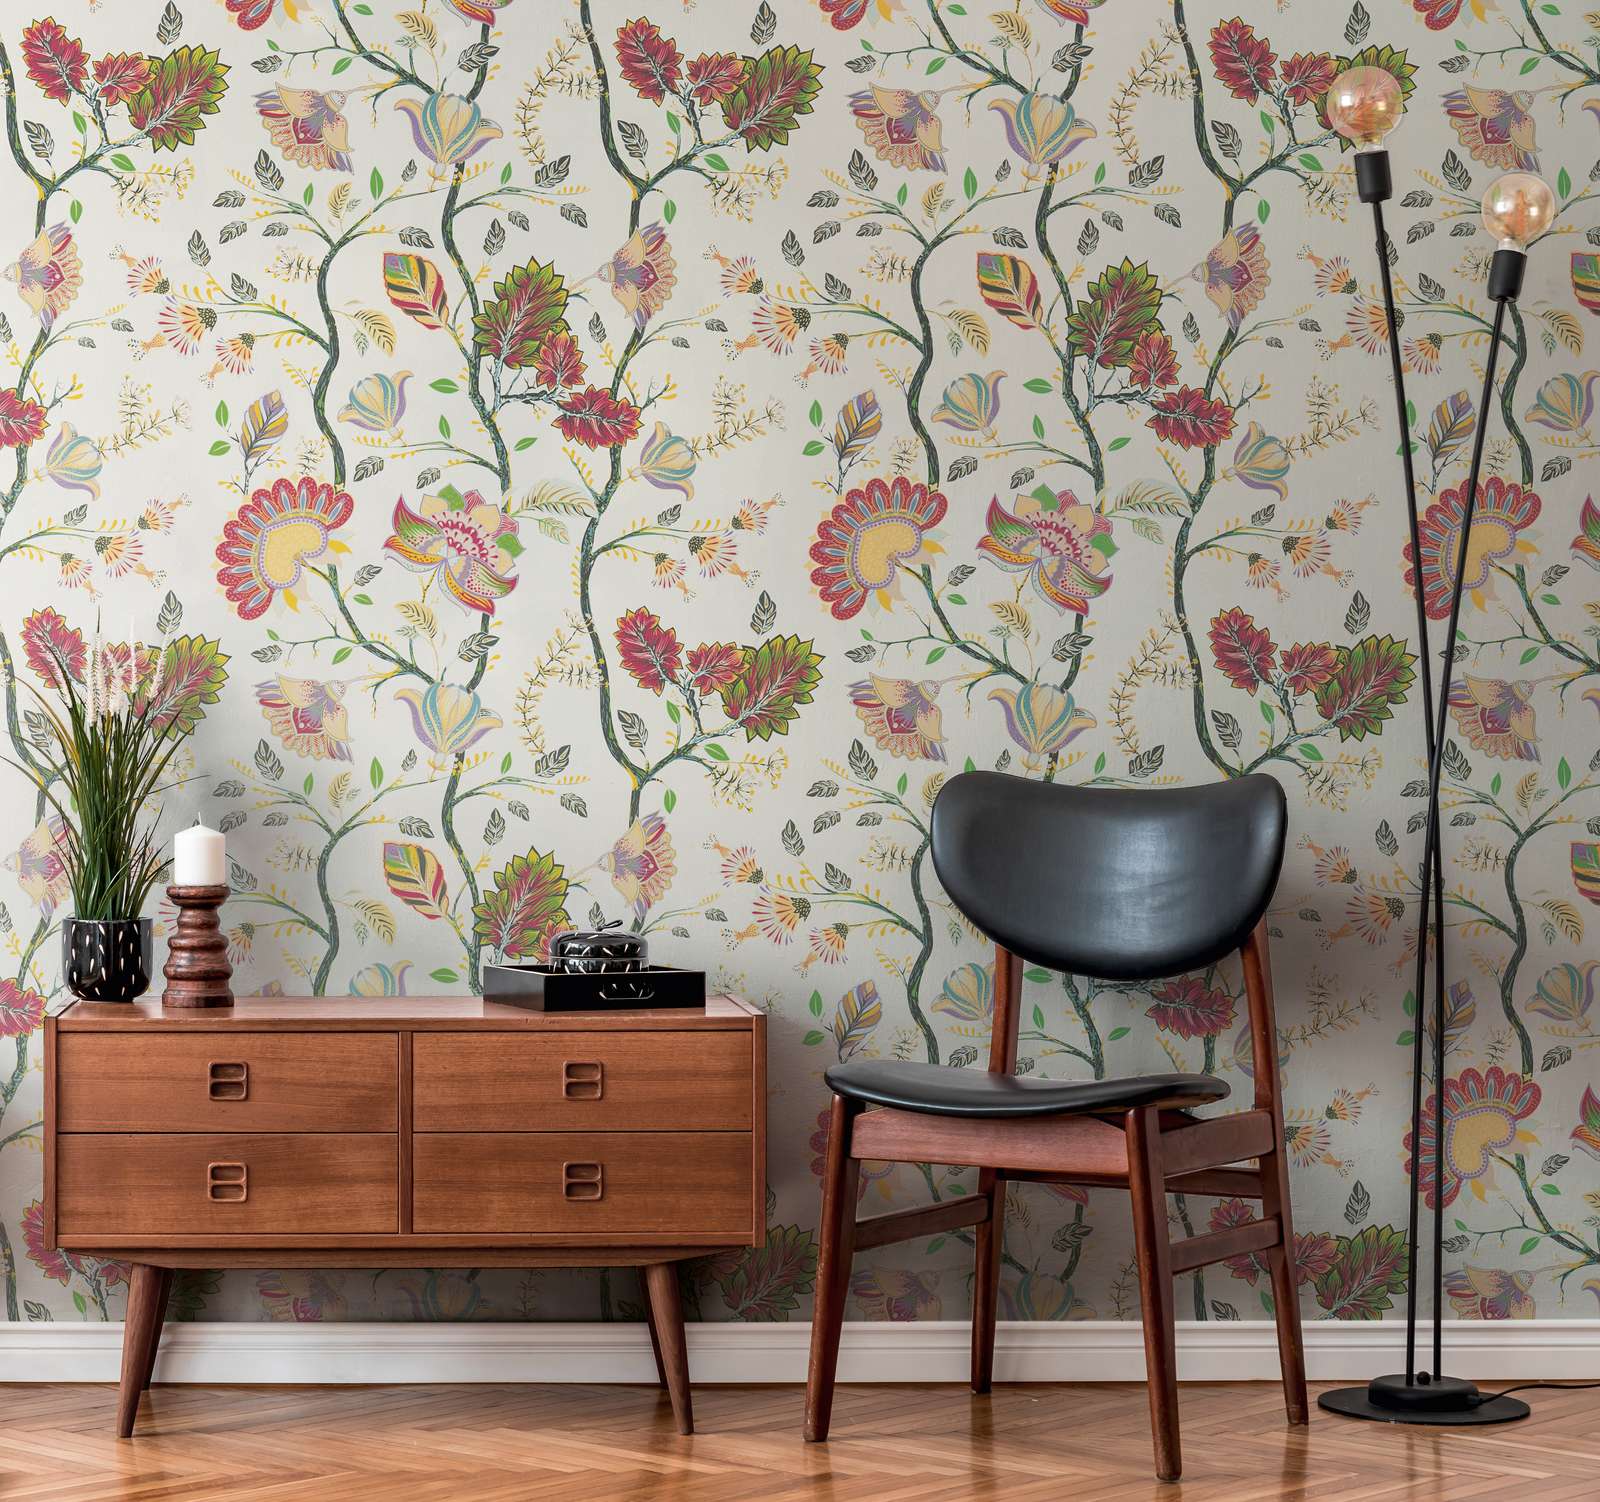             Floral non-woven wallpaper with bold colours - red, yellow, green
        